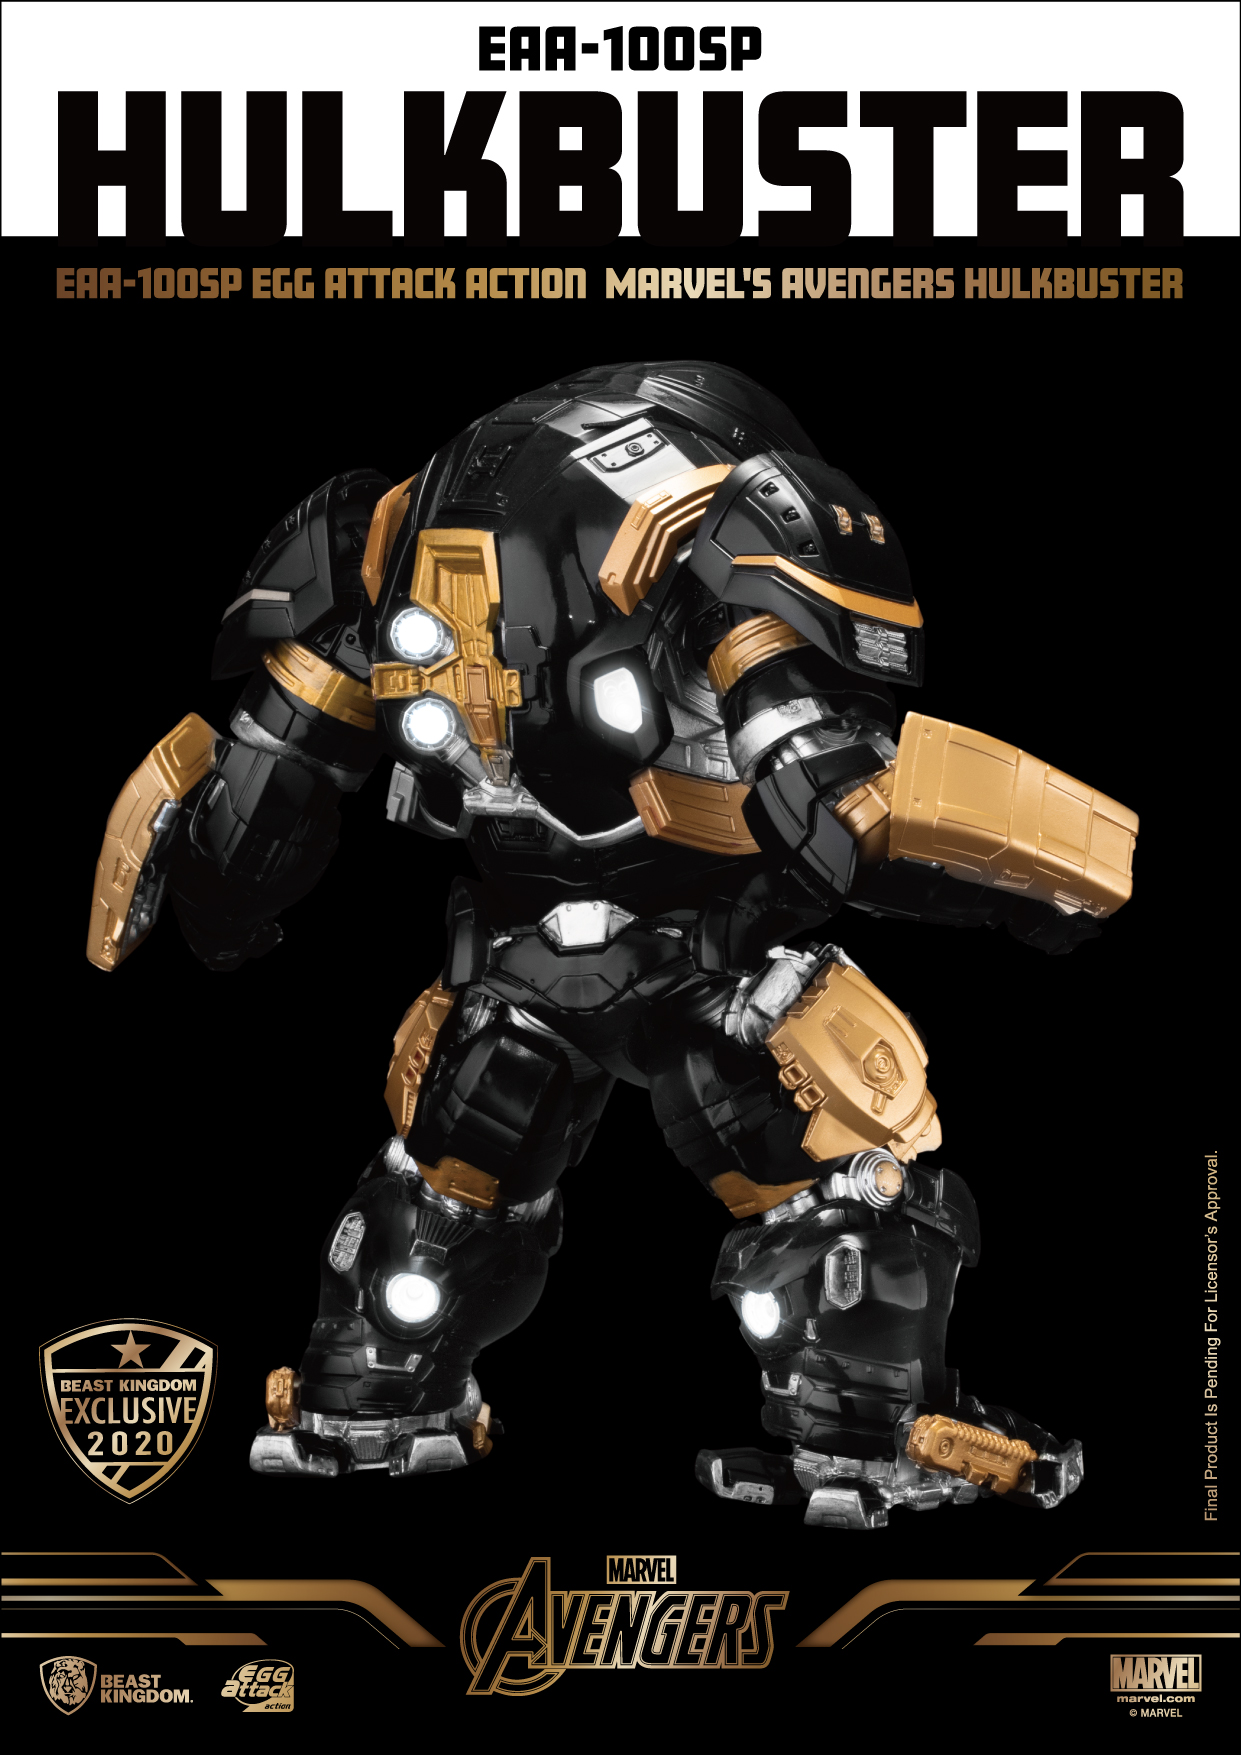 Marvel Egg Attack Action : Avengers : Age of Ultron Hulkbuster Limited Edition (EAA-100SP)